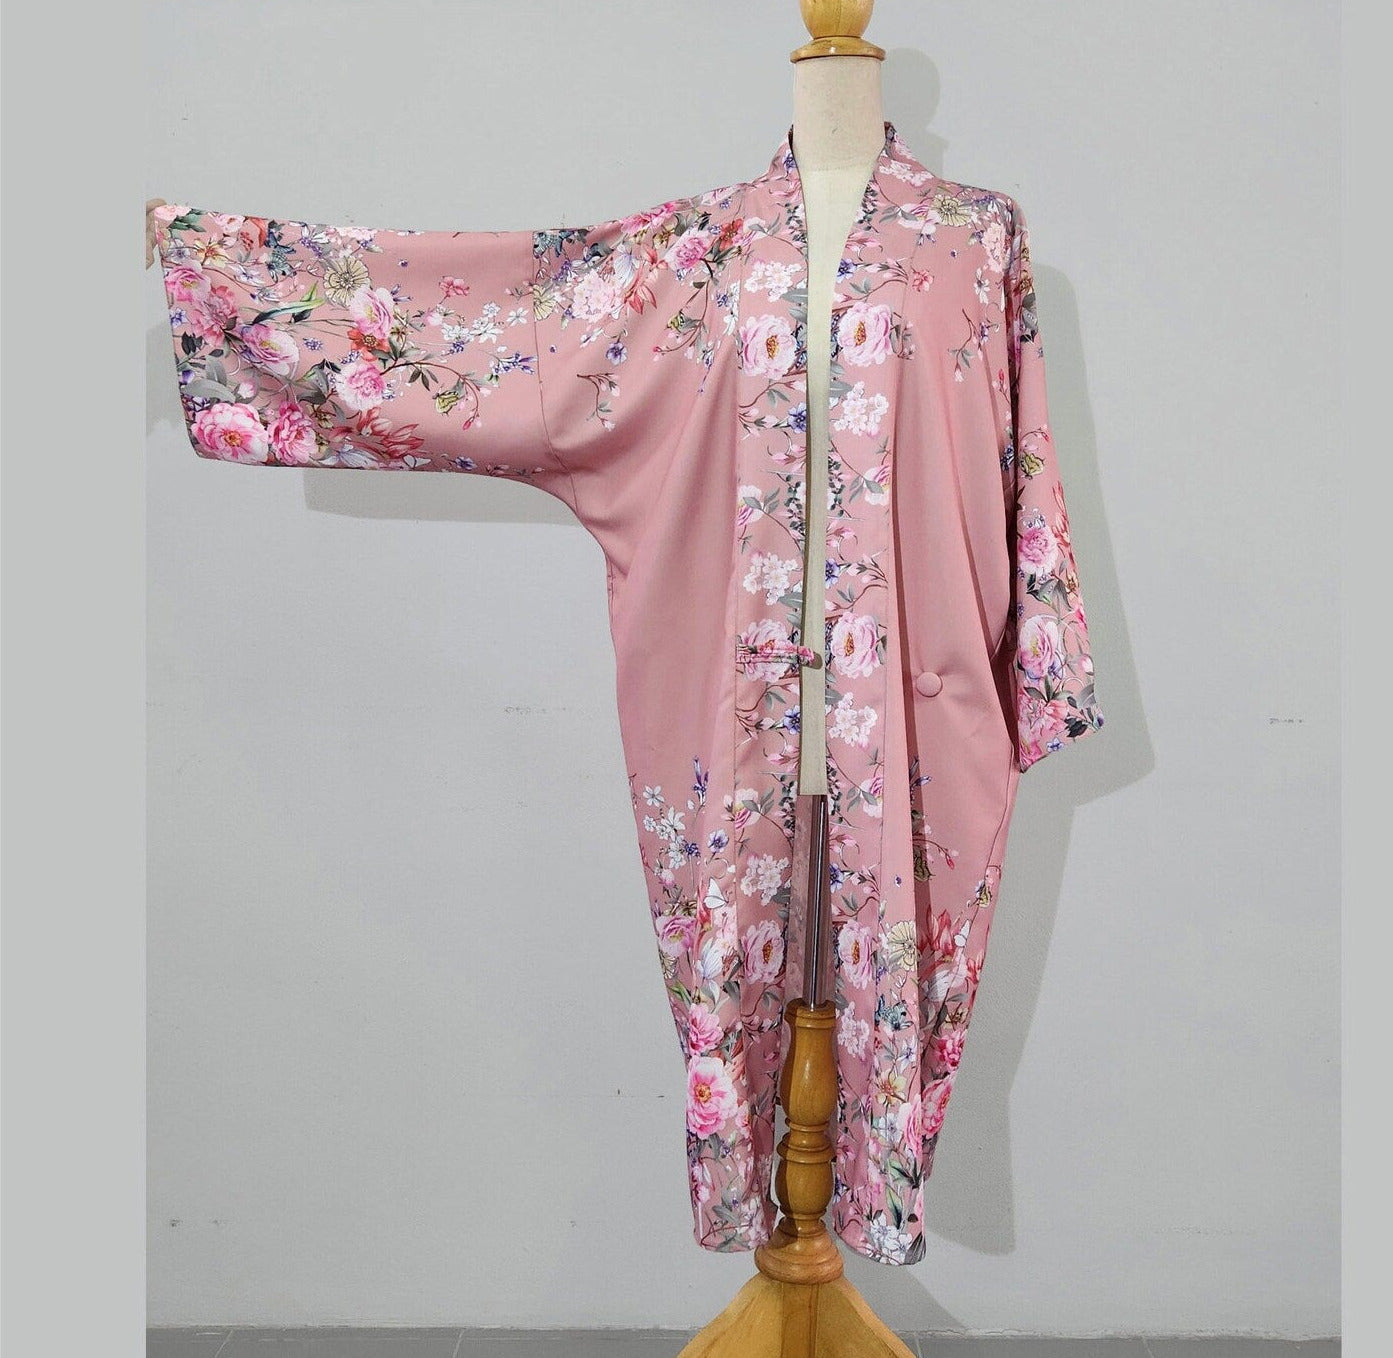 Kimono robe inspired by 1920s loungewear fashion. The 1920s kimono can be worn as a Great Gatsby coat. Also as 1920s wedding bridesmaid robe.